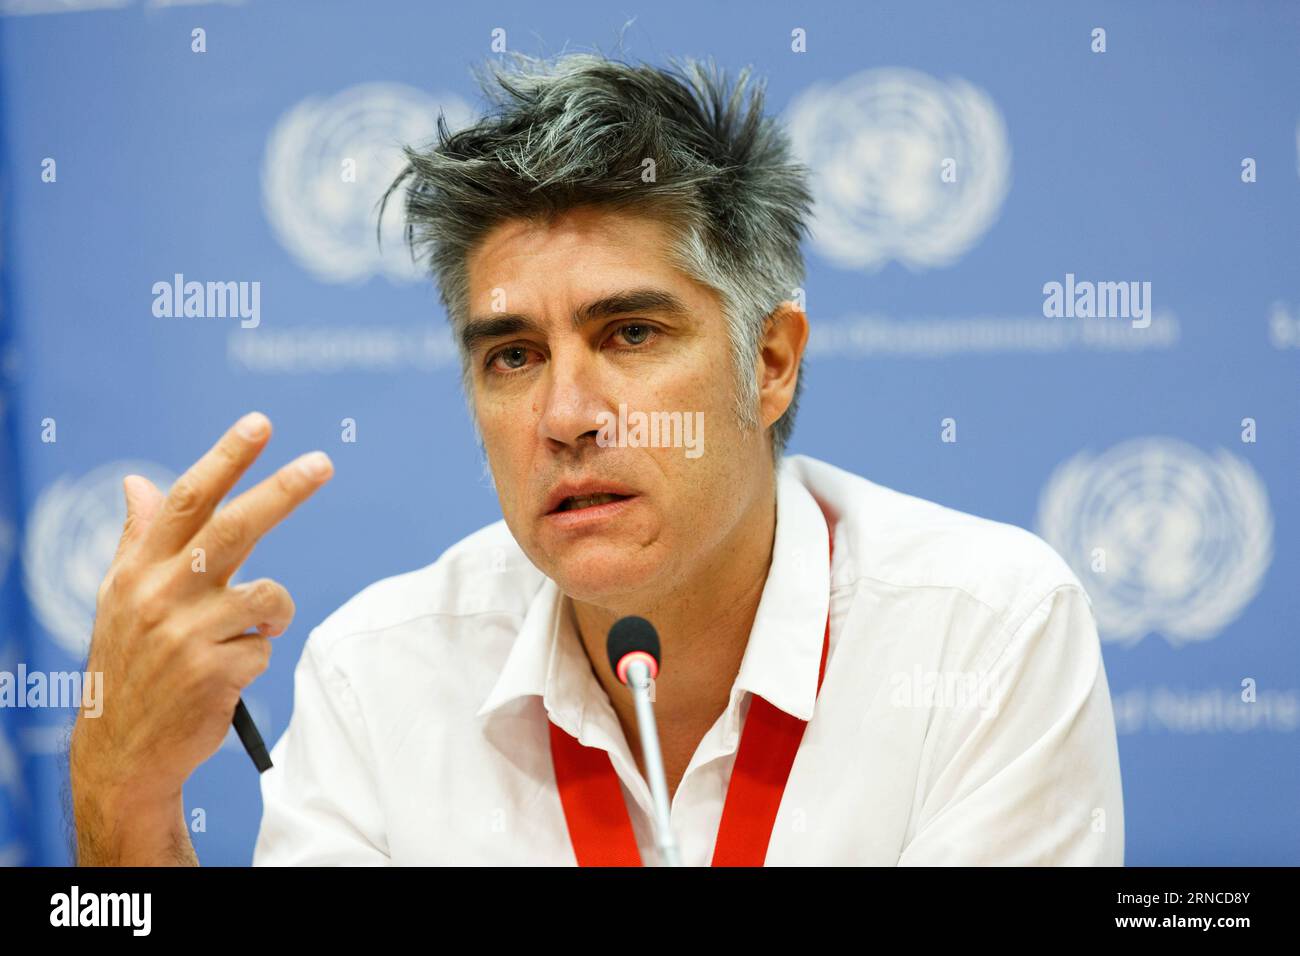 (160405) -- NEW YORK, April 5, 2016 -- Alejandro Aravena, Chilean architect and winner of the Pritzker Architecture Prize for 2016, briefs journalists on the link between architecture and sustainable development, at the United Nations headquarters in New York, April 5, 2016. The Sustainable Development Goals Fund (SDGF) and Pritzker Architecture Prize laureate Alejandro Aravena draw on the role of architecture to improve livelihoods and achieve Sustainable Development Goals (SDG). ) UN-NEW YORK-ALEJANDRO ARAVENA-PRESS CONFERENCE LixMuzi PUBLICATIONxNOTxINxCHN   New York April 5 2016 Alejandro Stock Photo